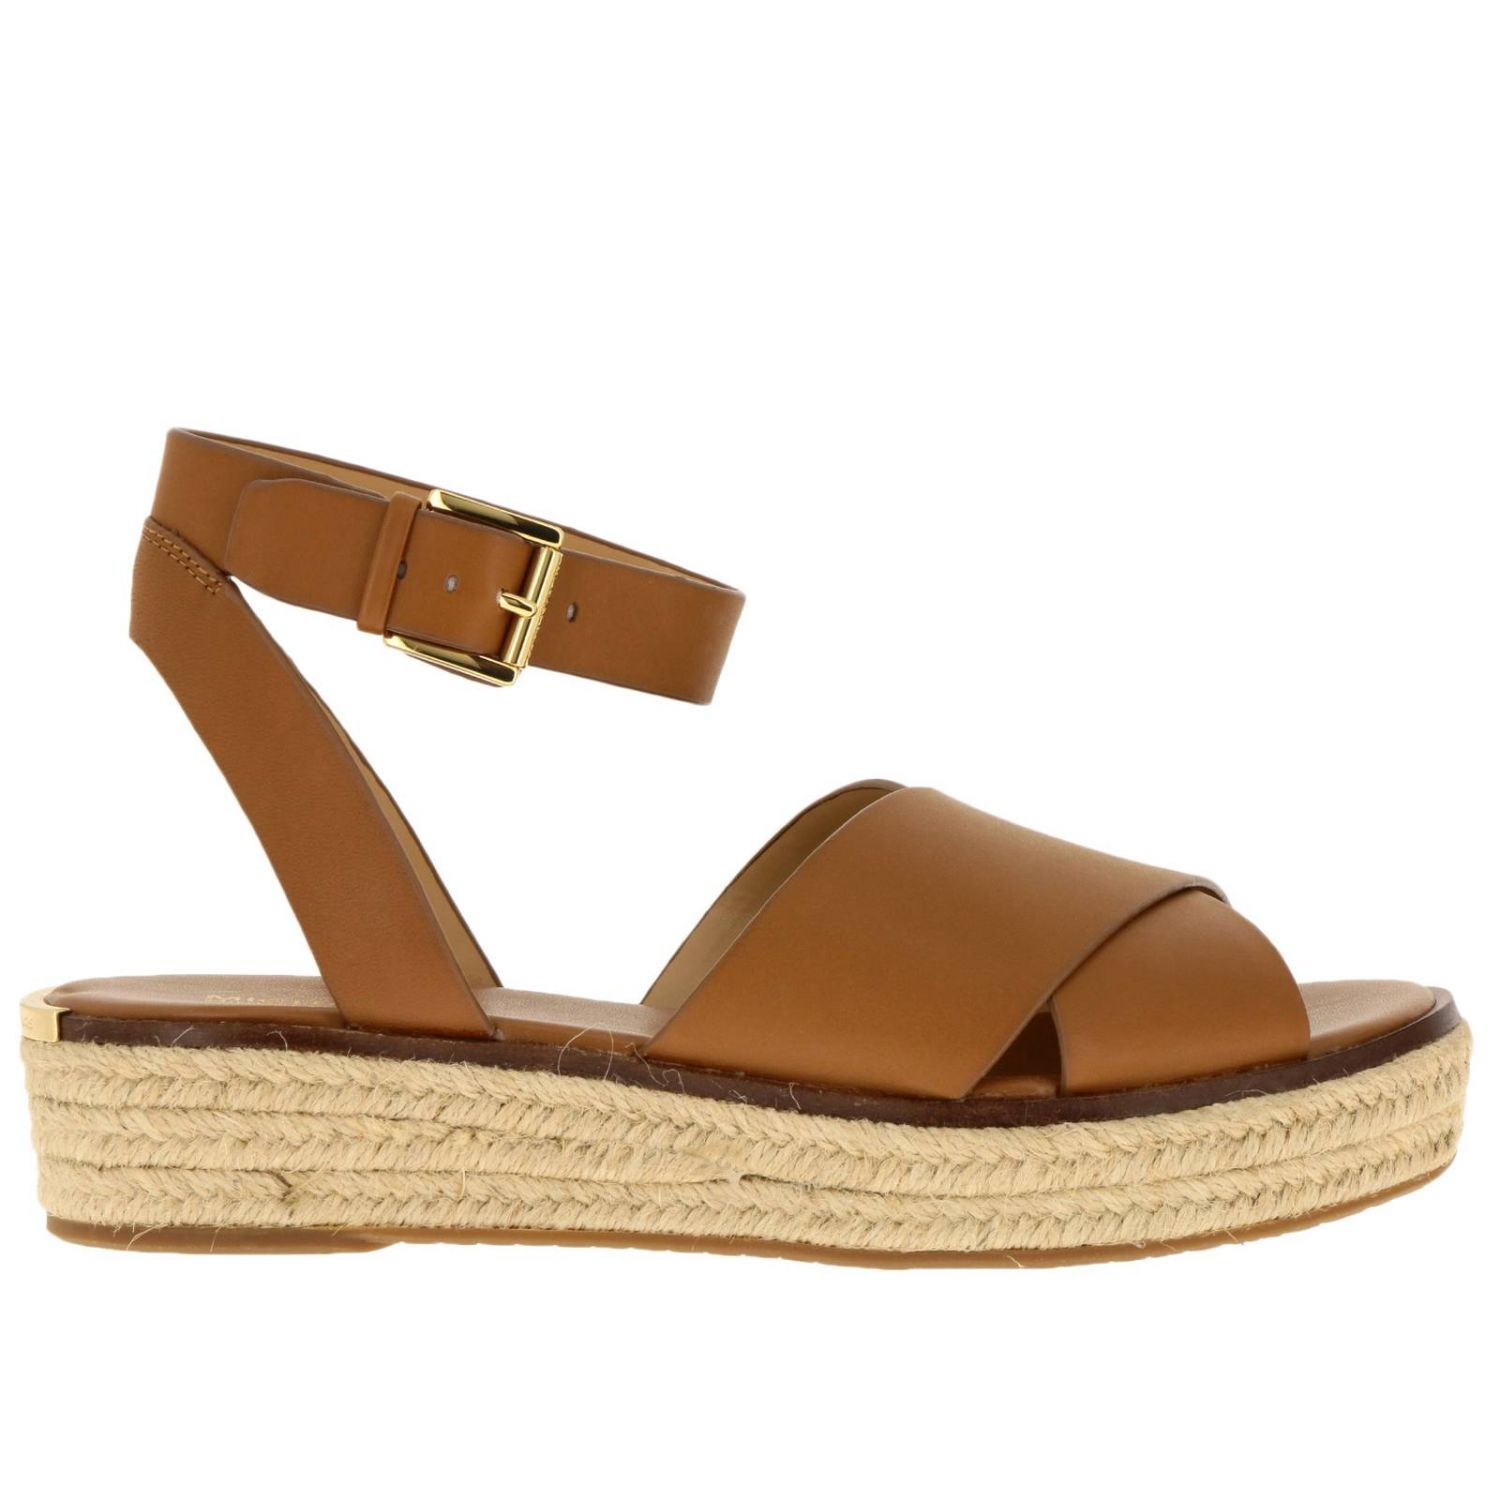 Michael Kors Outlet heeled sandals for woman  Cream  Michael Kors heeled  sandals 40F9AVMA1L online on GIGLIOCOM